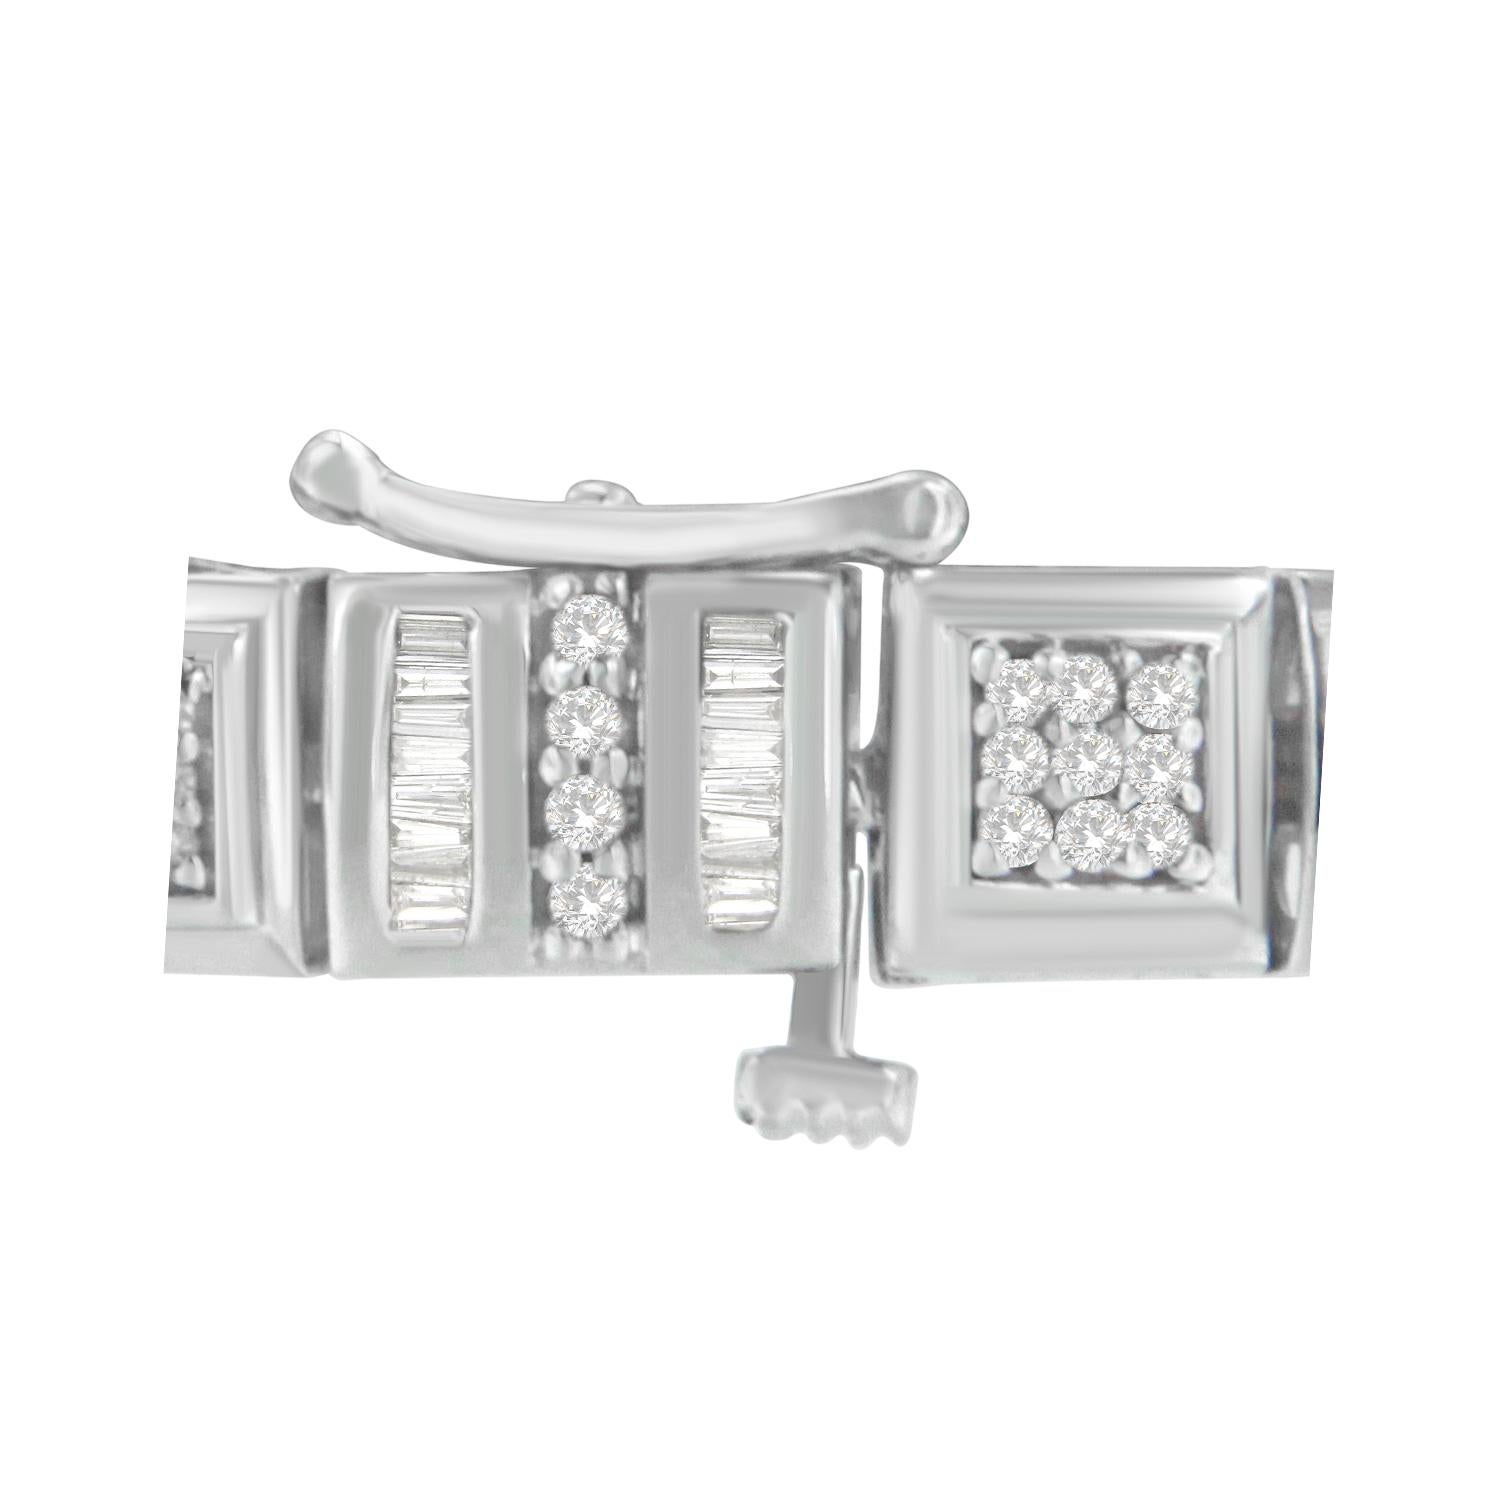 Round and baguette cut diamonds shimmer against a white gold finish on this exquisite two-carat diamond bracelet. Each square link comes together, creating a unique geometric design sure to dazzle her. Bracelet has 300 natural, round diamonds. Each